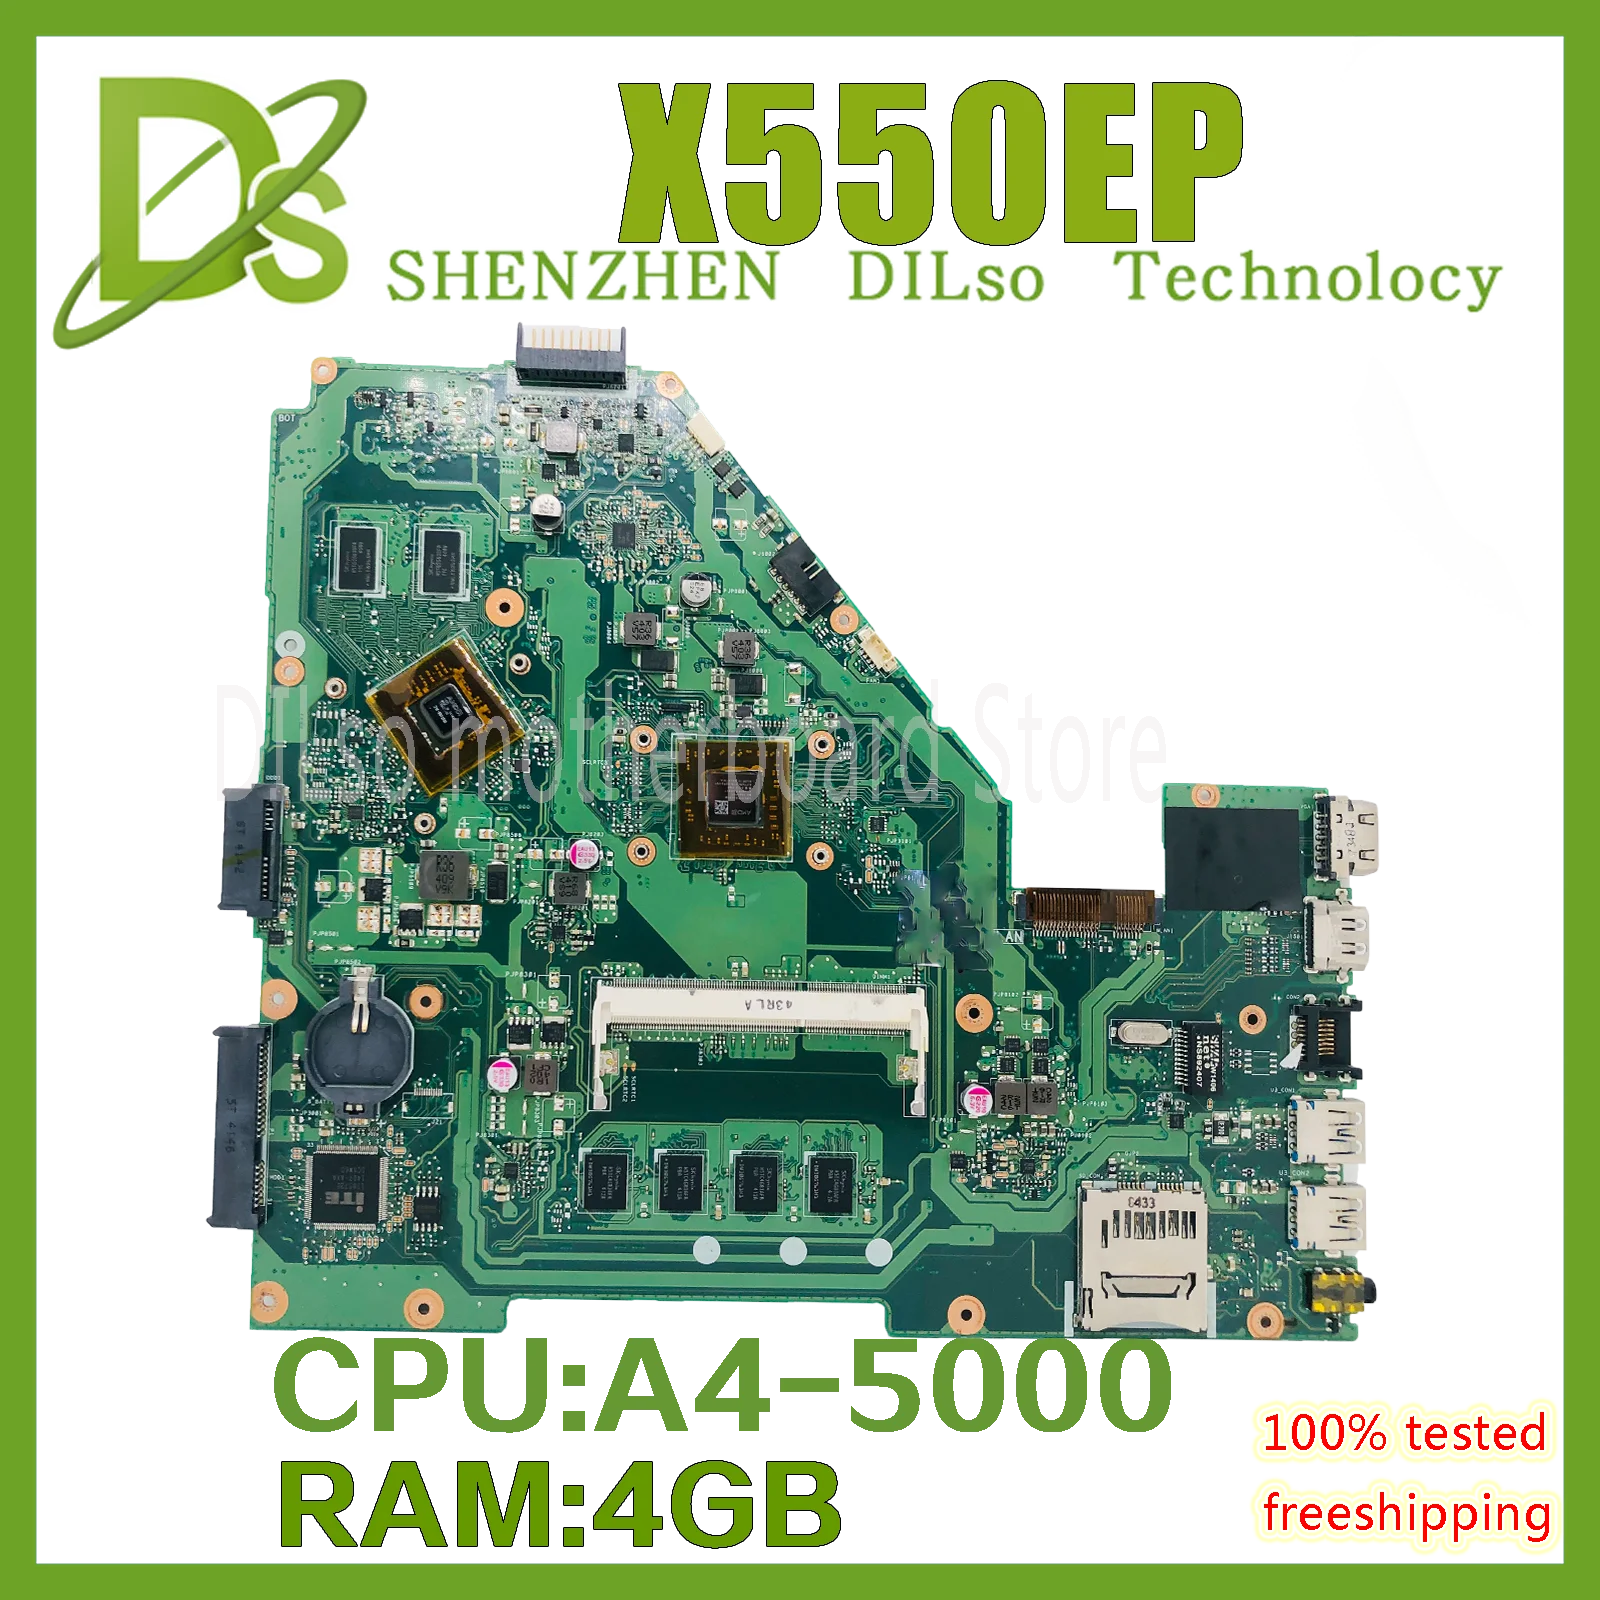 

KEFU X550WE Motherboard For Asus X550W X550WE X550W X550EP D552W X552WE Laptop Mainboard A4-5000 CPU 4GB-RAM 100% Tested